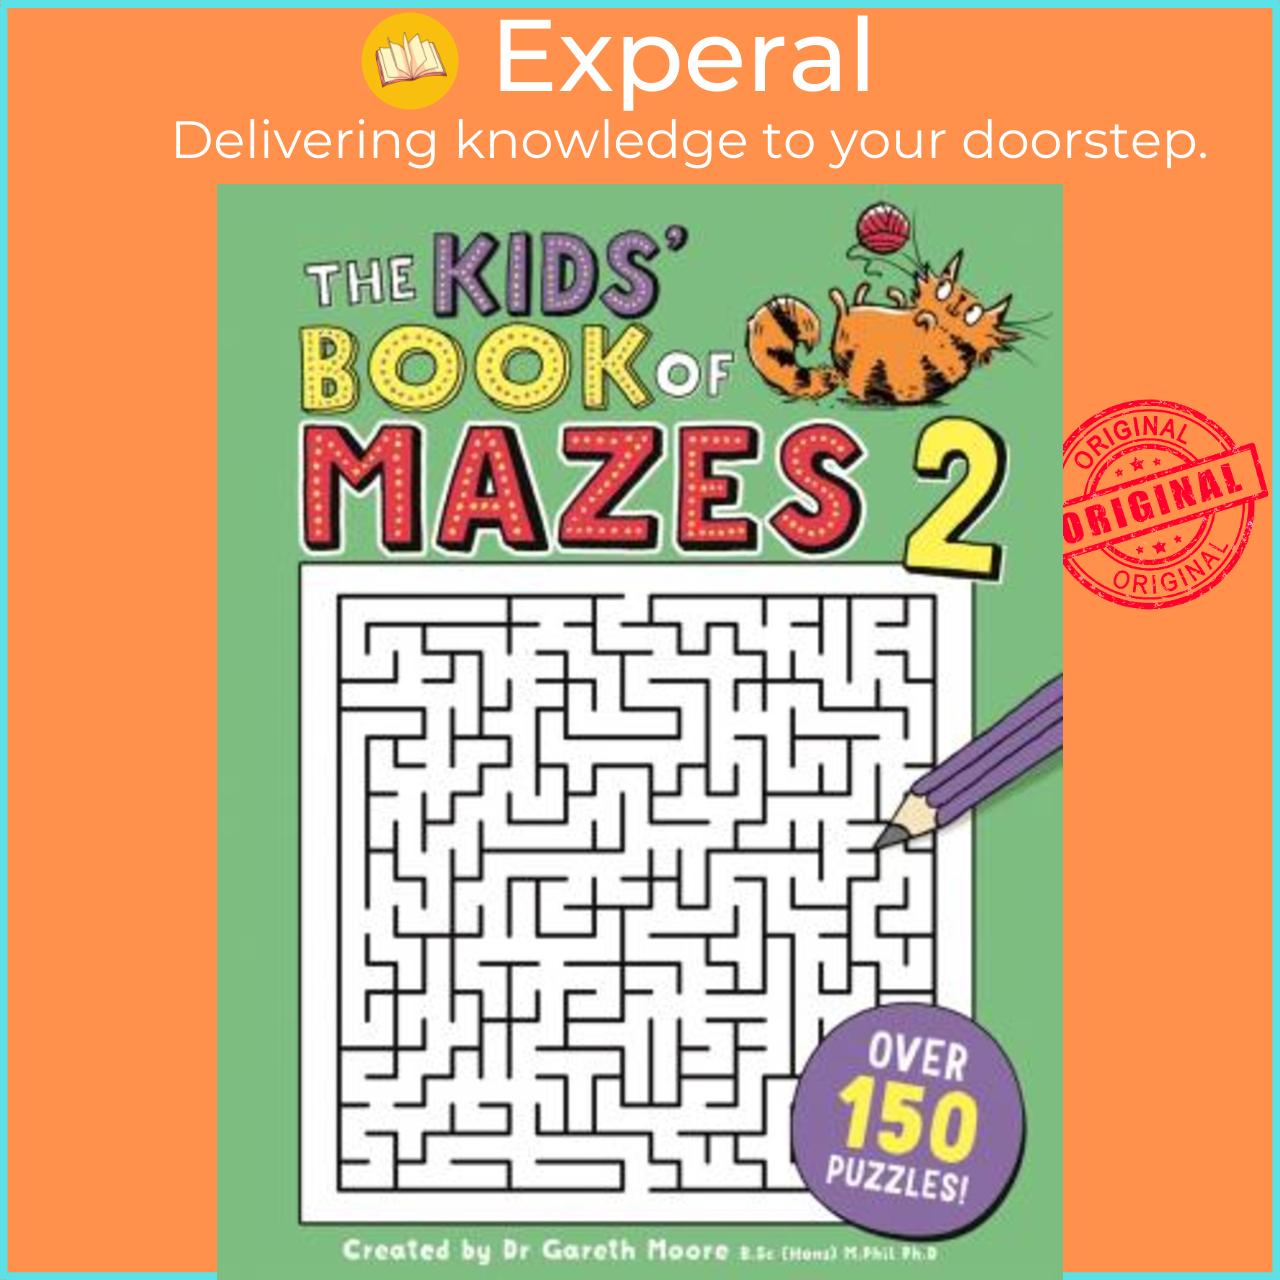 Sách - The Kids' Book of Mazes 2 by Gareth Moore (UK edition, paperback)